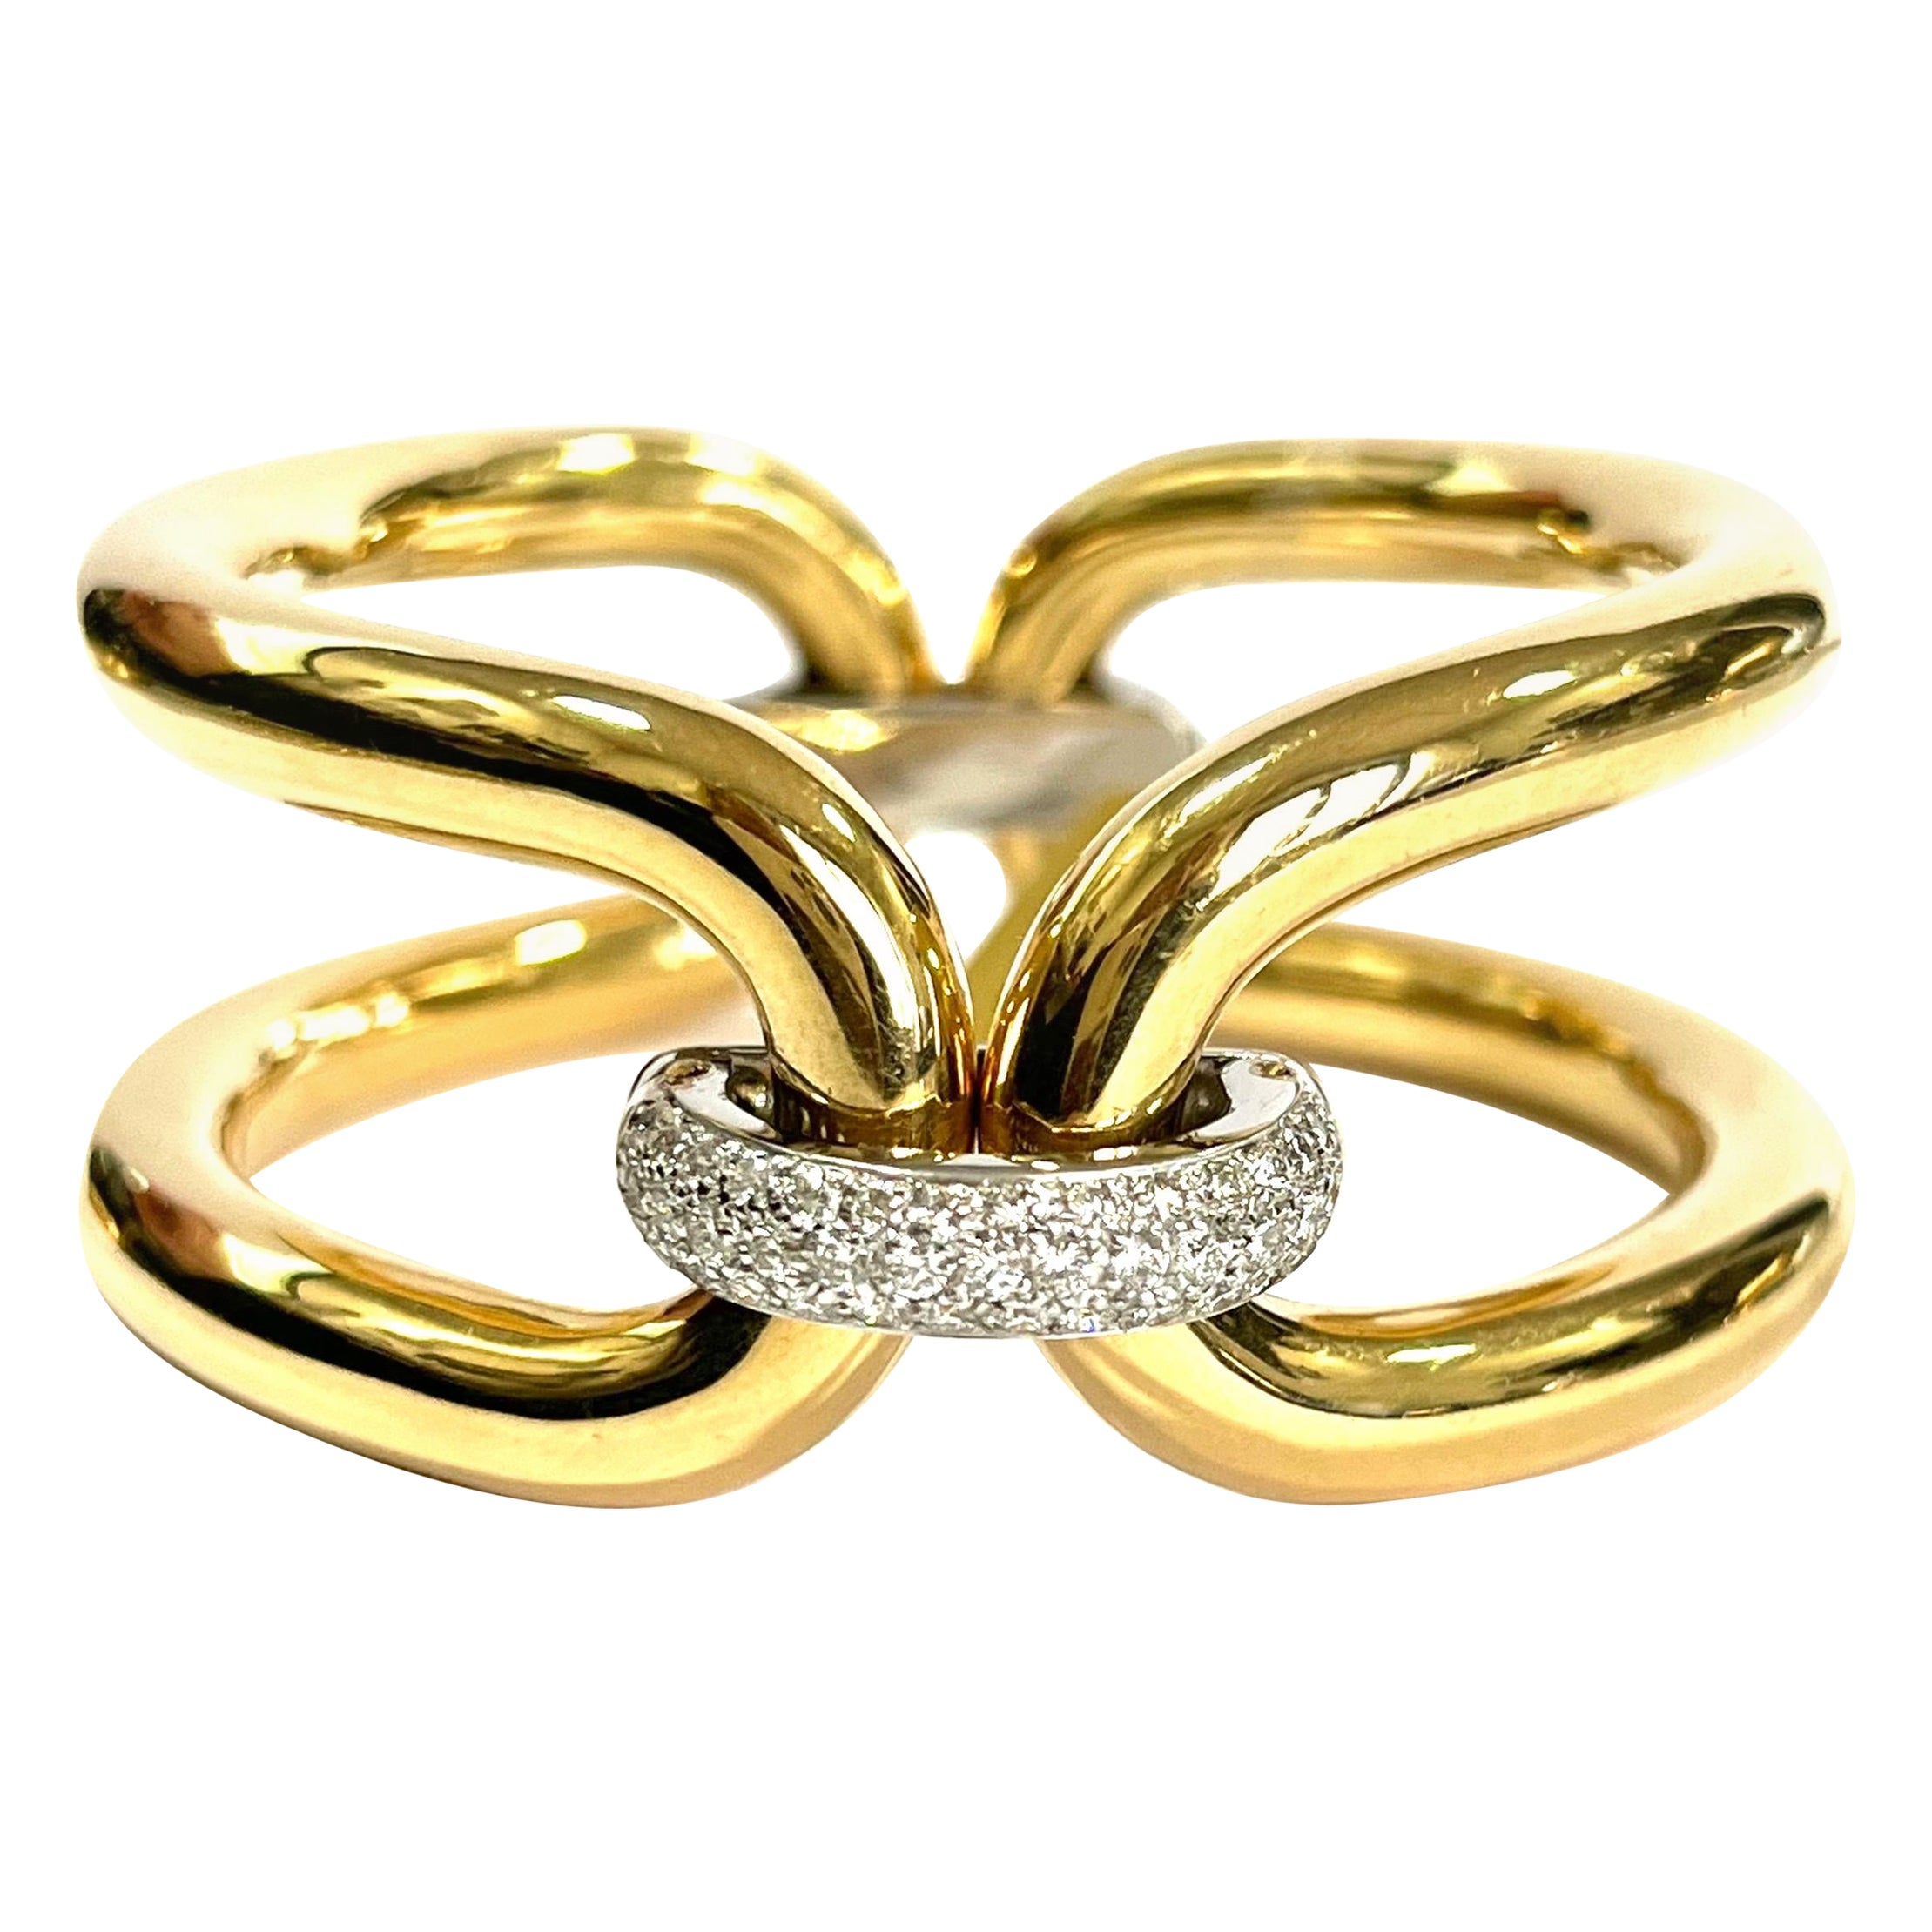 Yellow 18k Gold Bangle with White Gold and Diamond Links For Sale